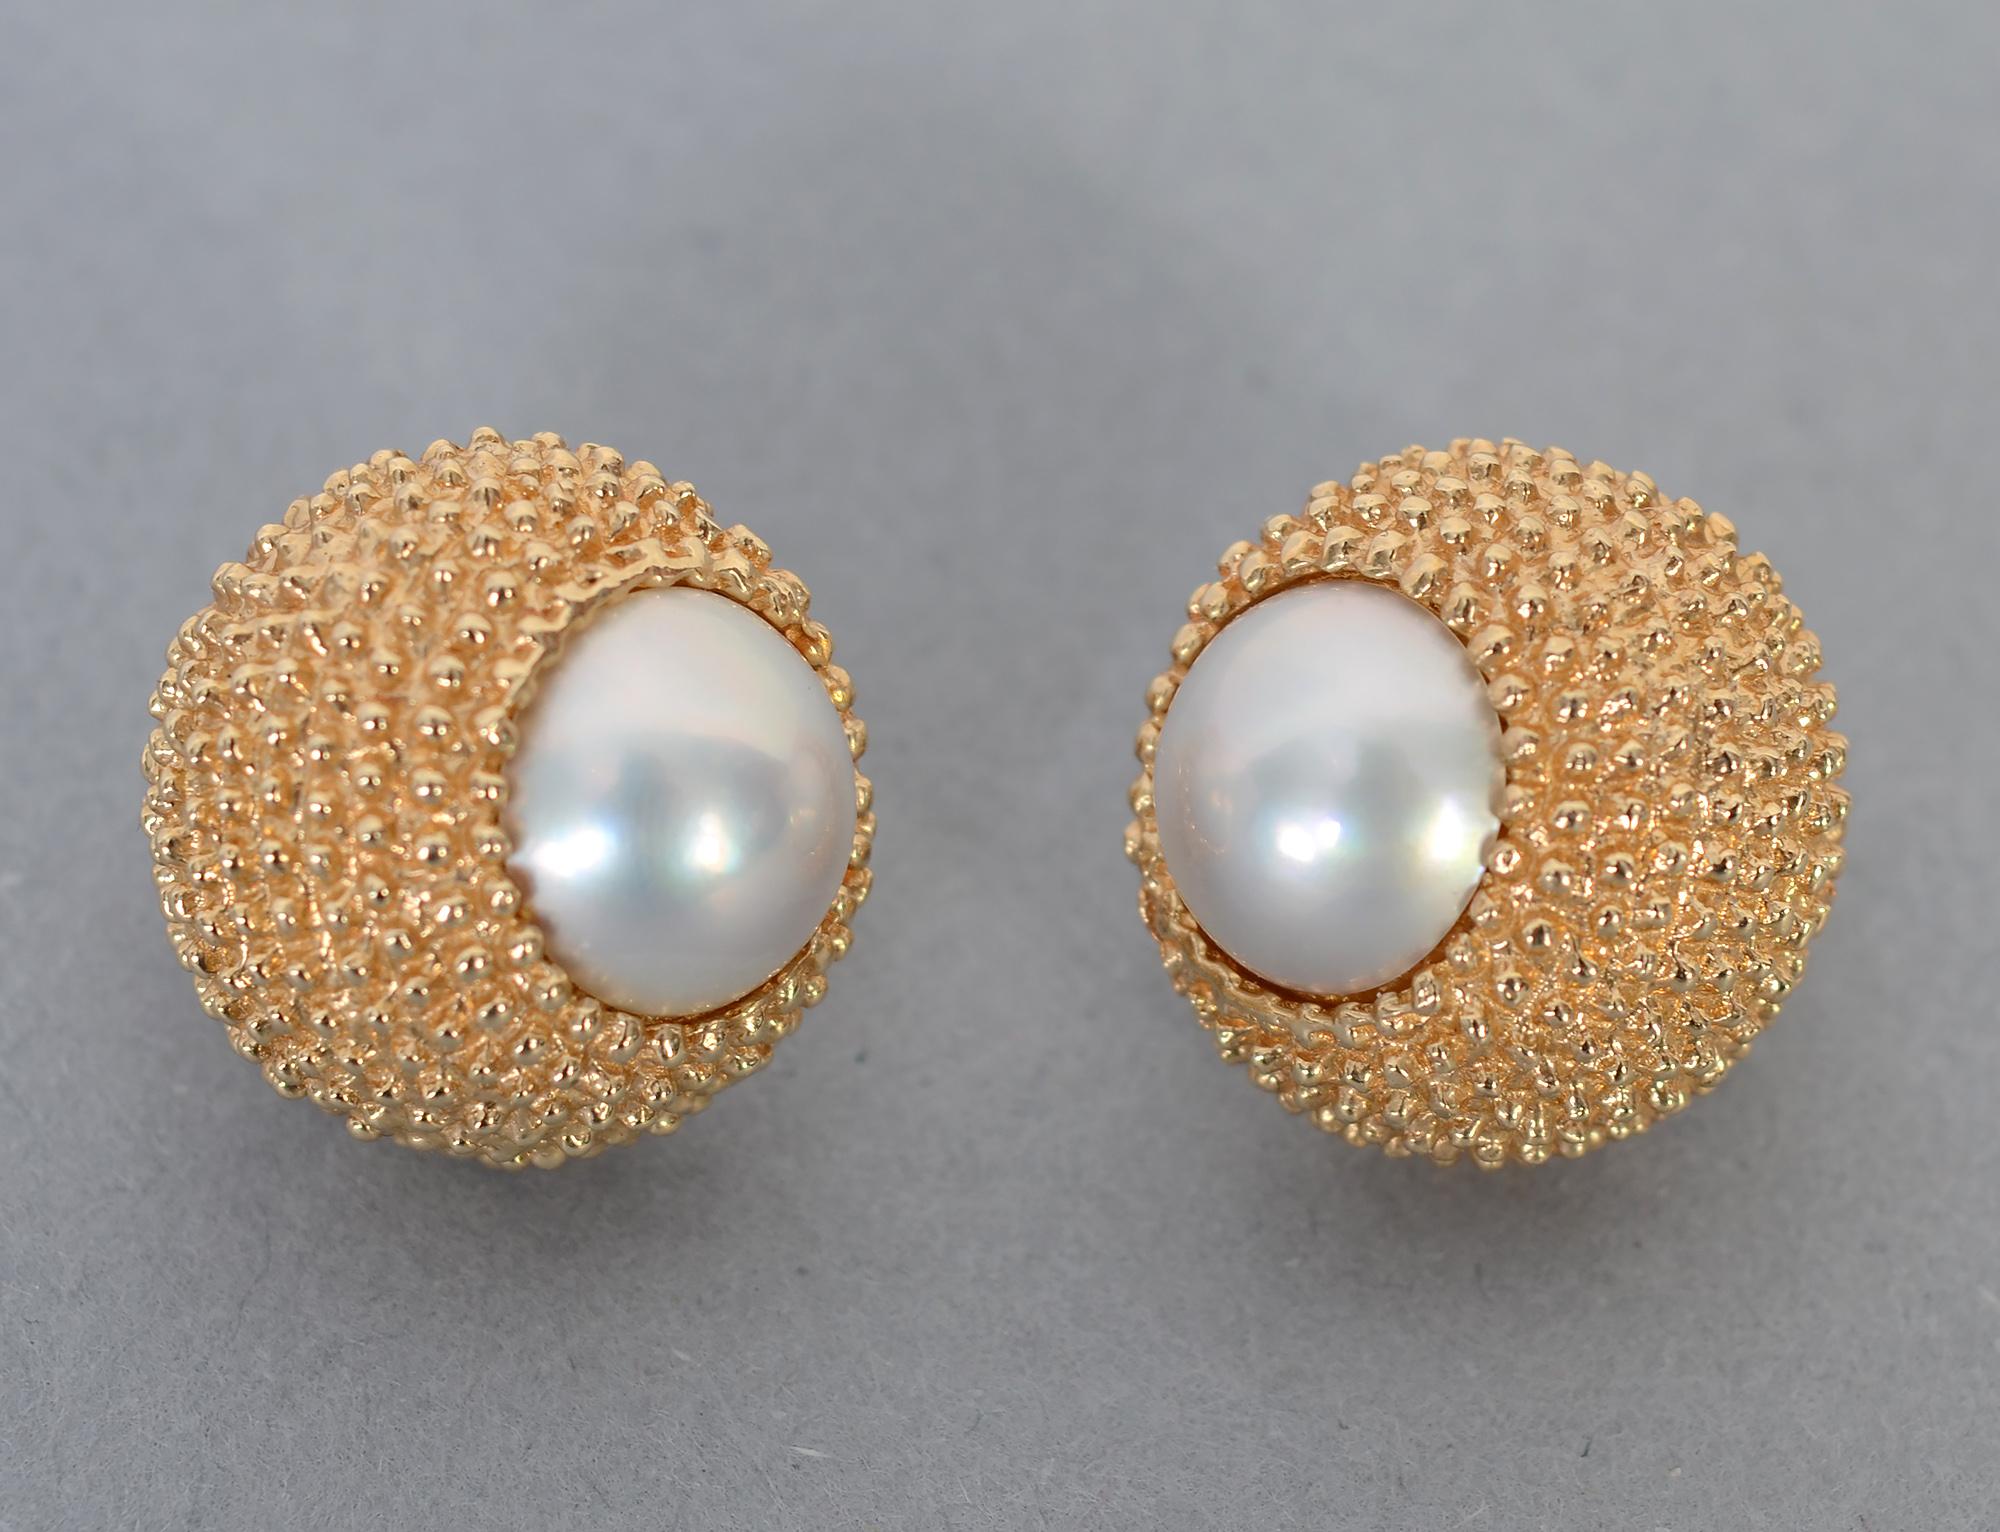 Attractive and unusual round gold earrings with a pearl set on the top end of each. The 14 karat gold is intricately textured with tiny beading.  The pearls are approximately 9 mm in width.
Backs are clips and posts. Posts can easily be removed to